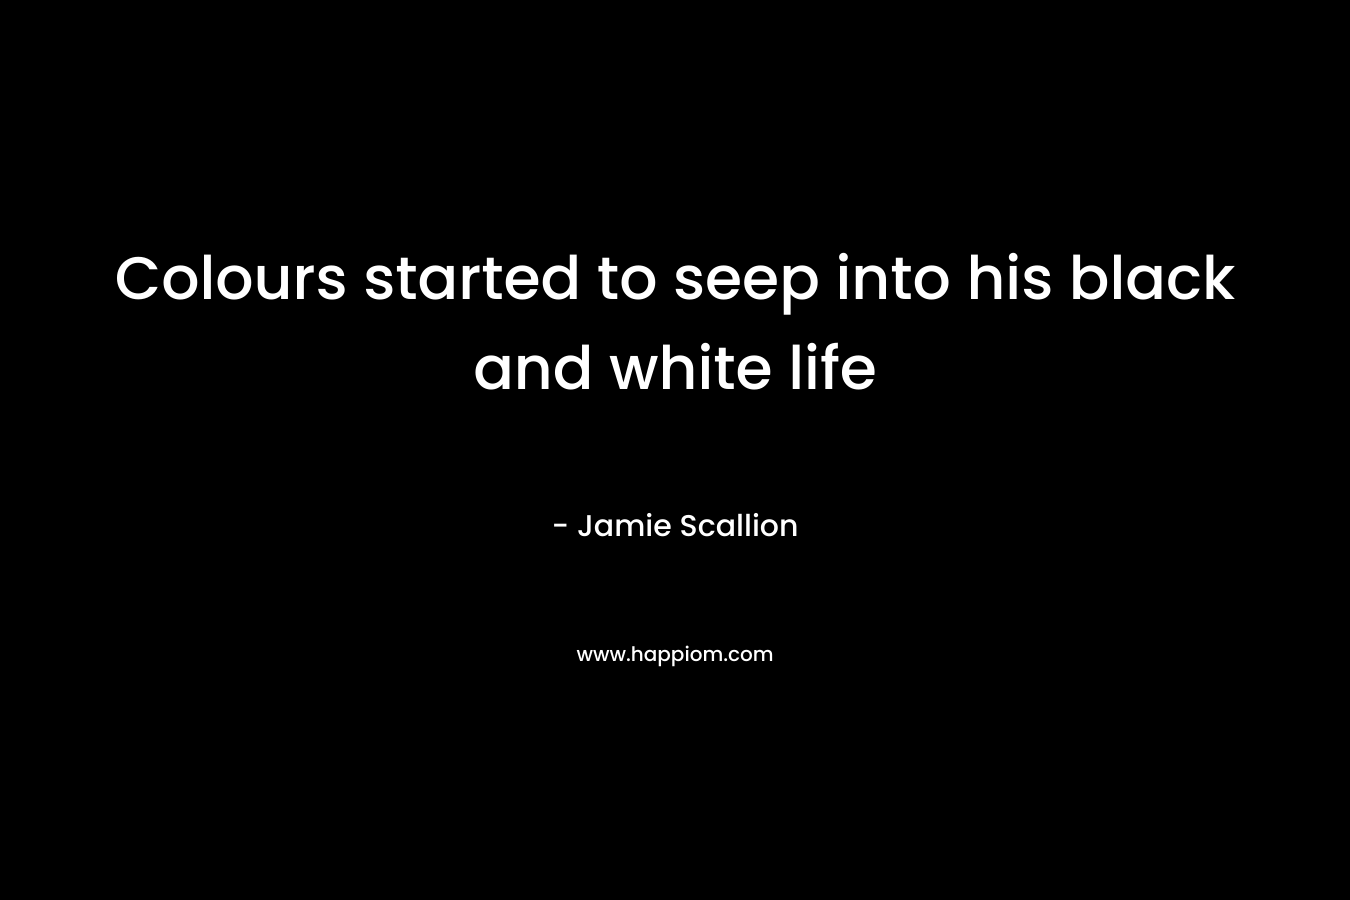 Colours started to seep into his black and white life – Jamie Scallion